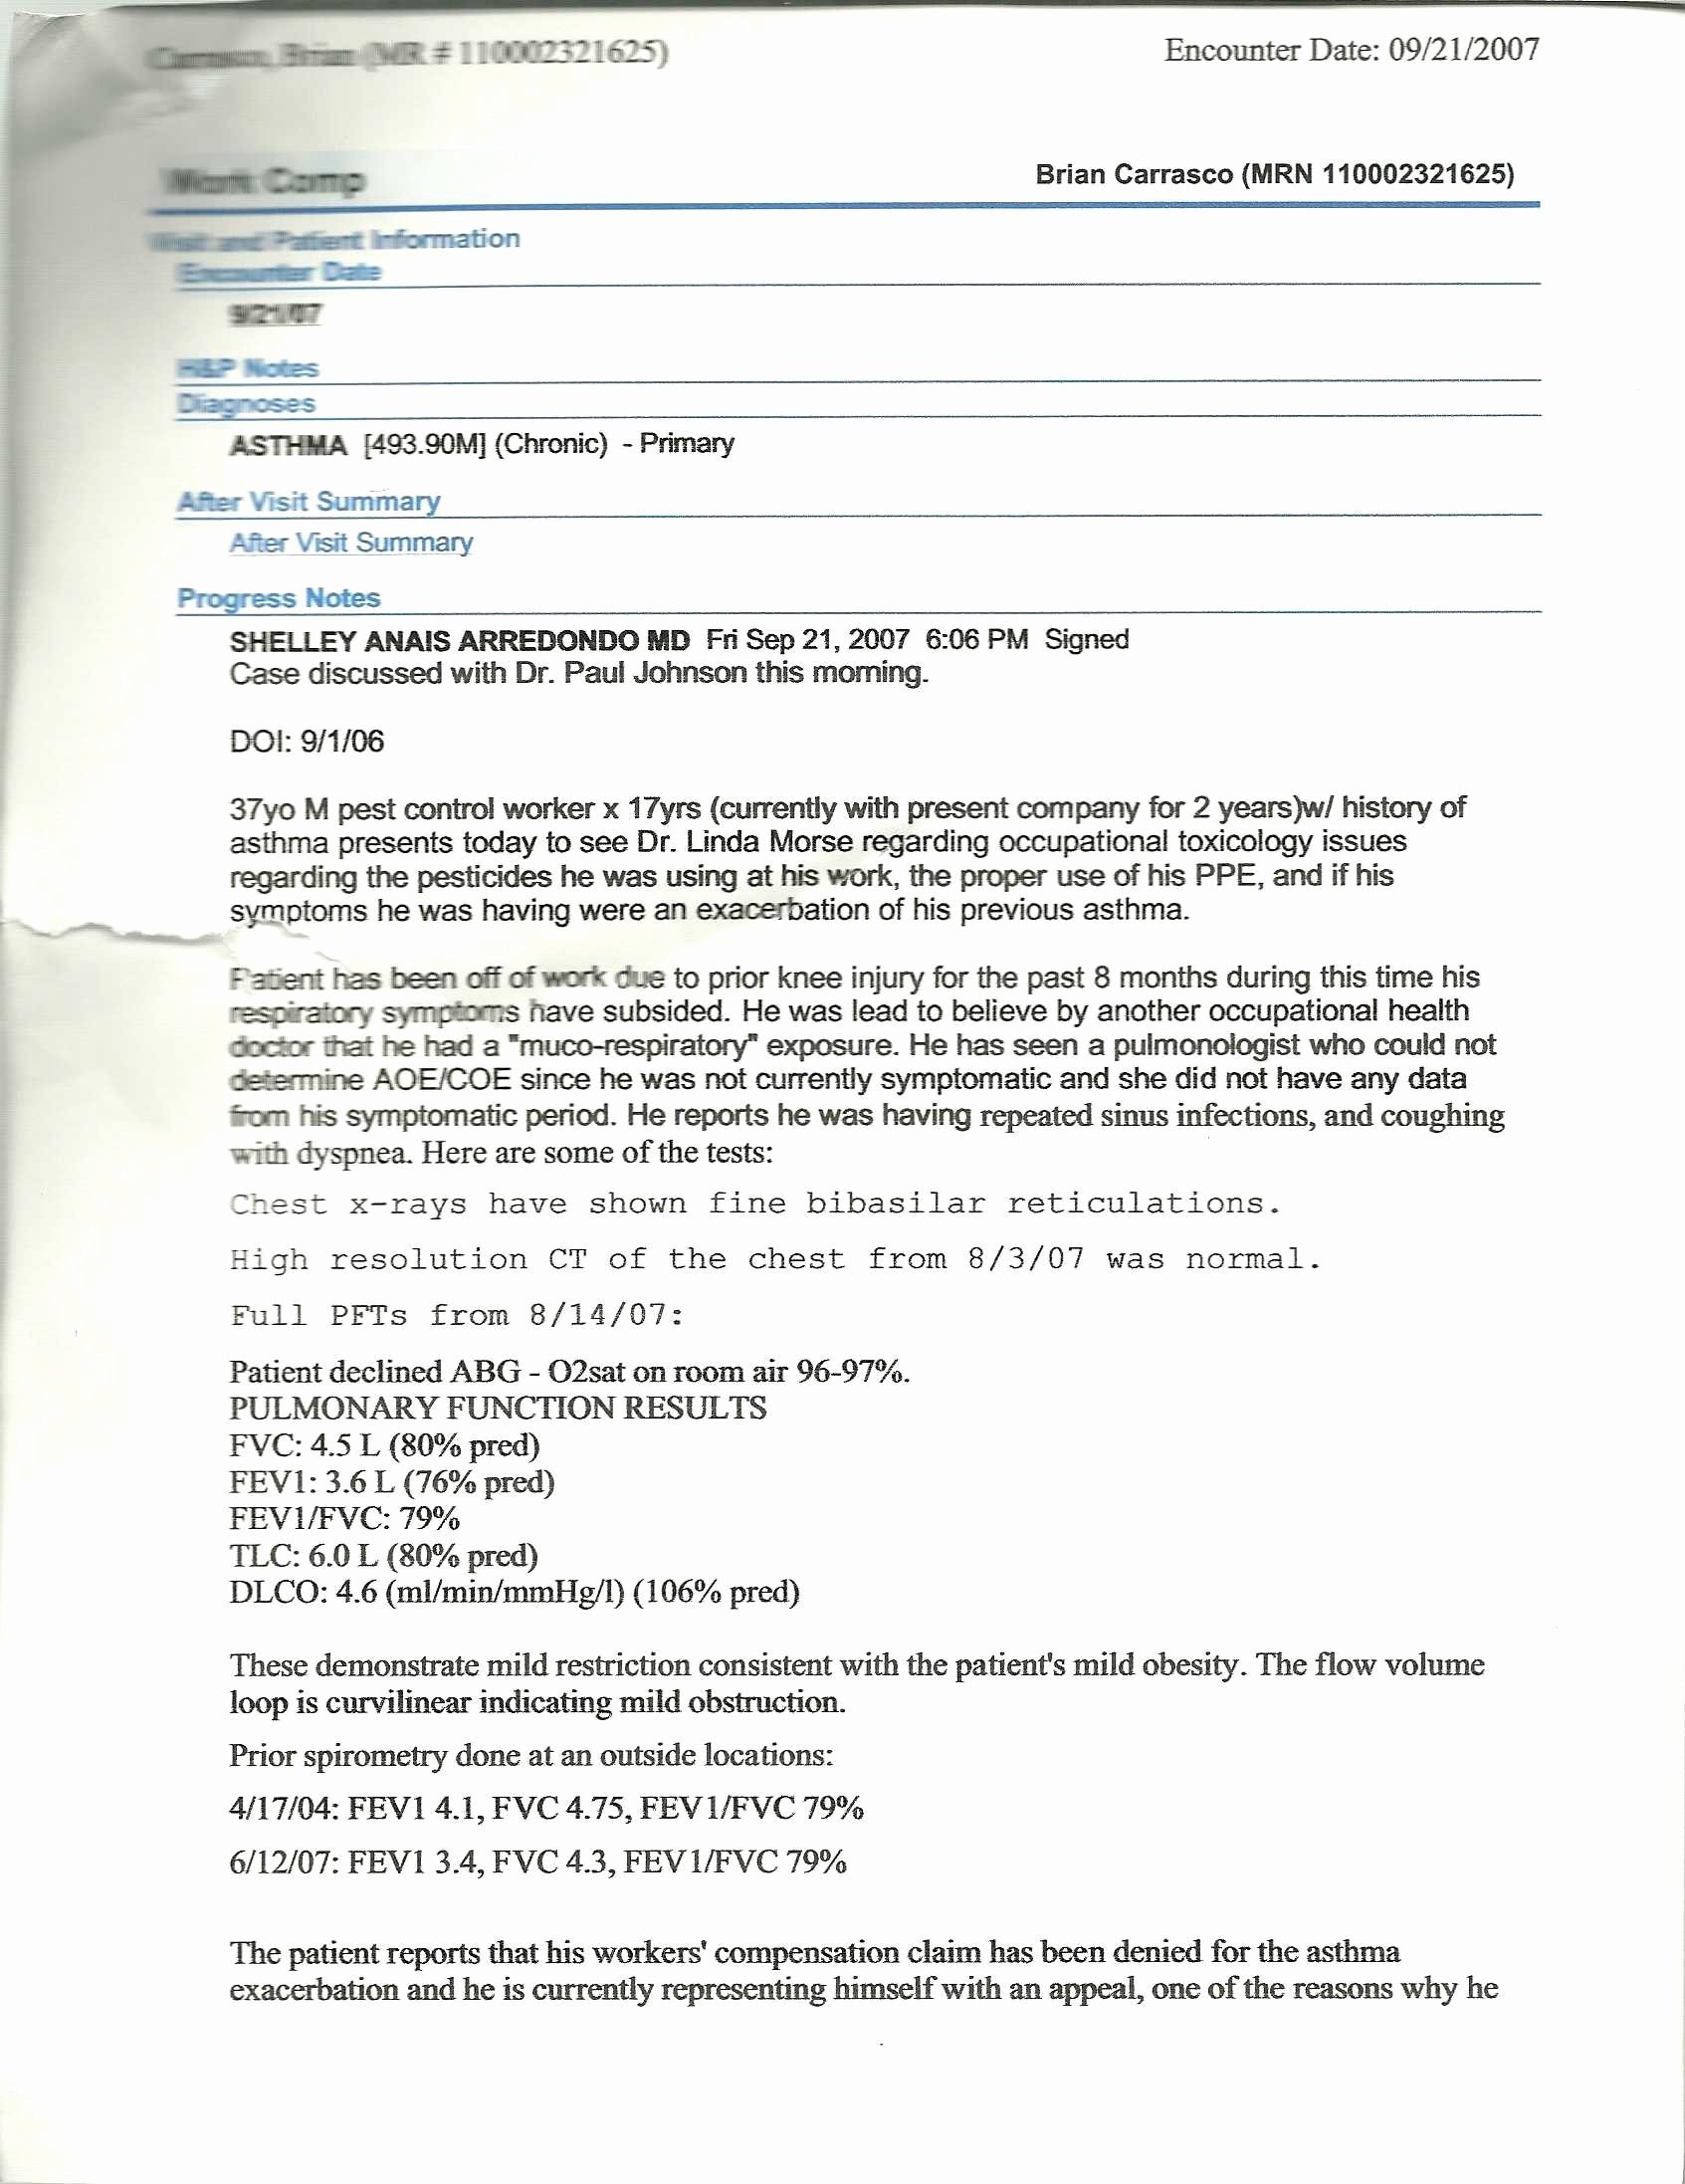 Kaiser Permanente Doctors Note Template Audiopinions Document Template